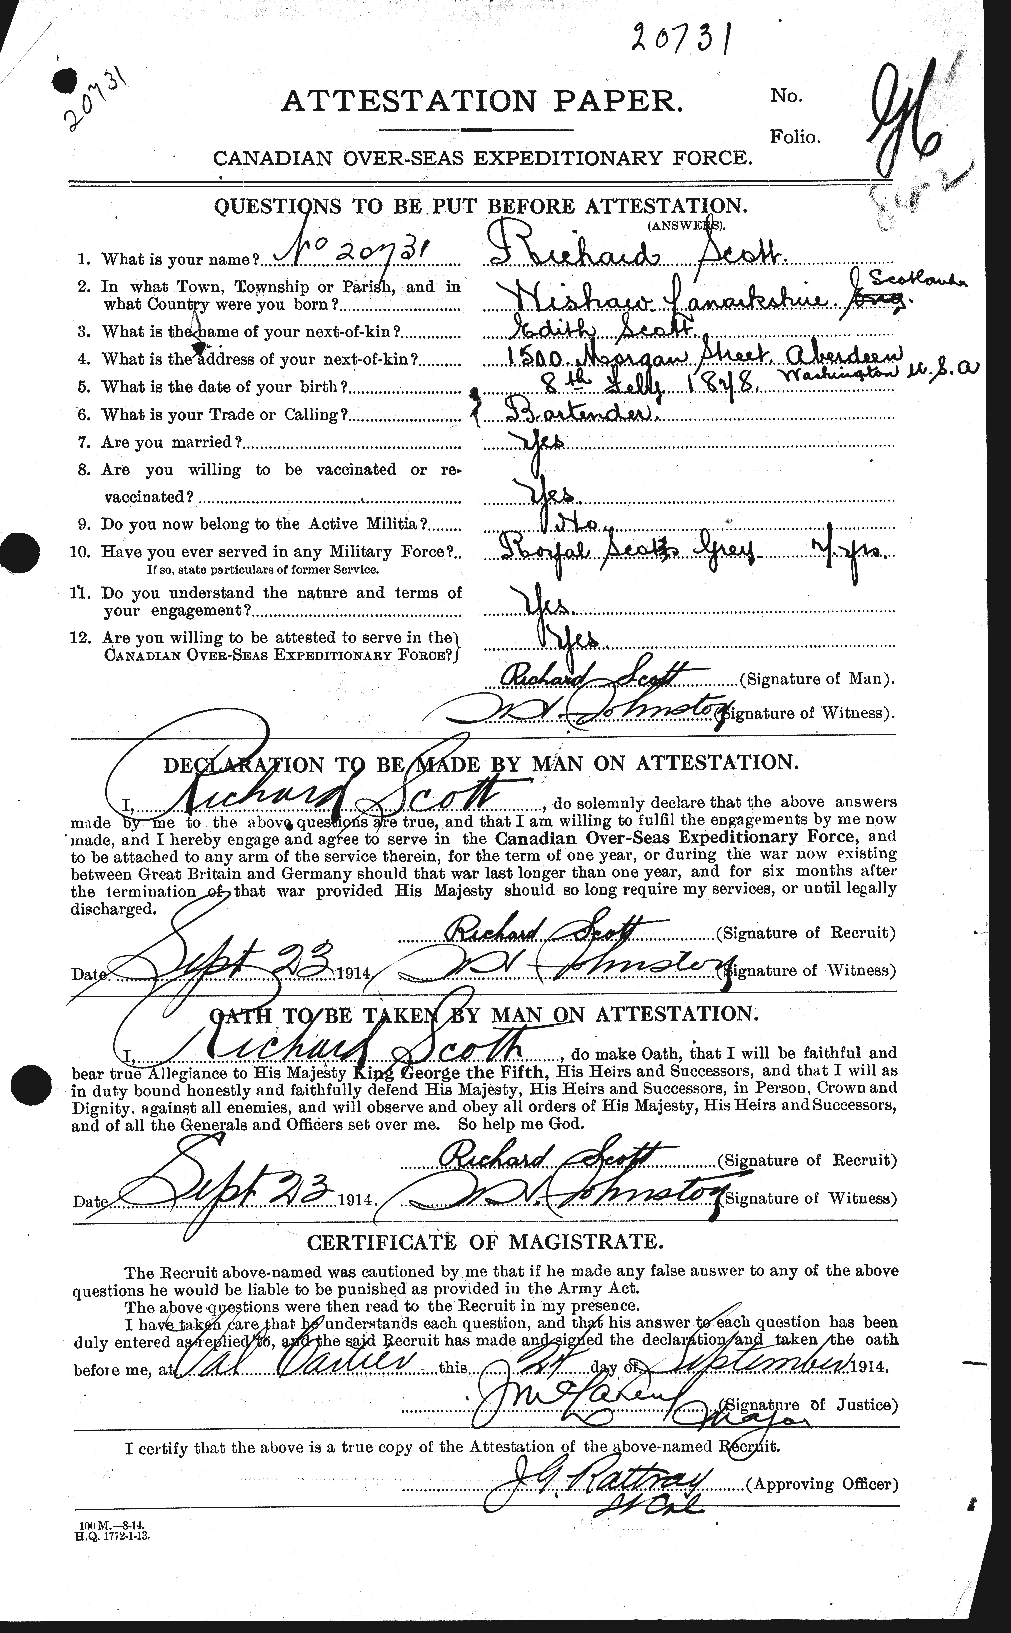 Personnel Records of the First World War - CEF 090181a